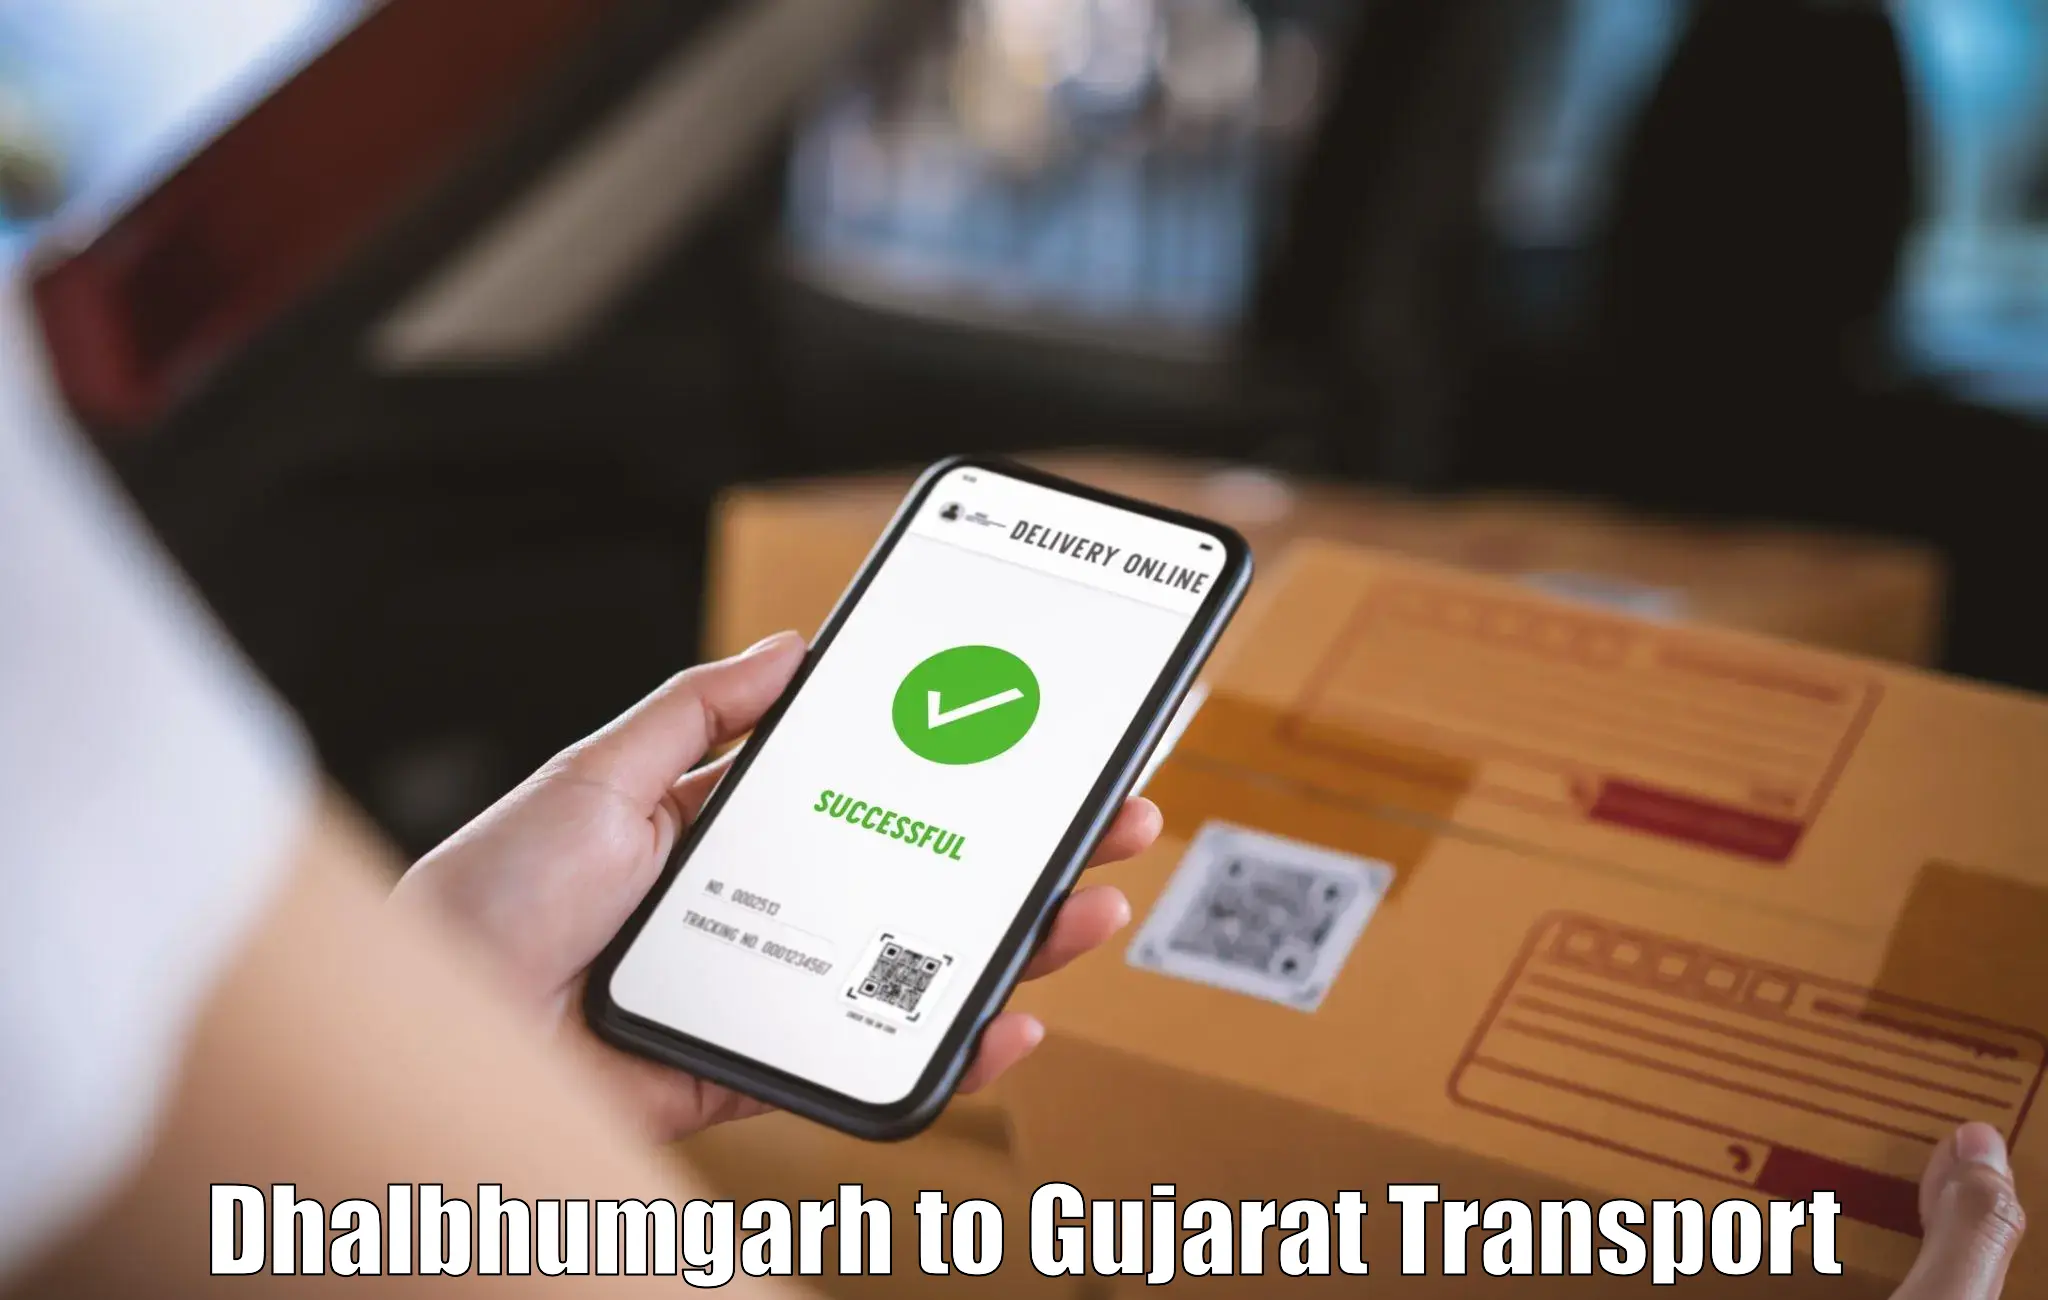 Road transport services Dhalbhumgarh to Sanand